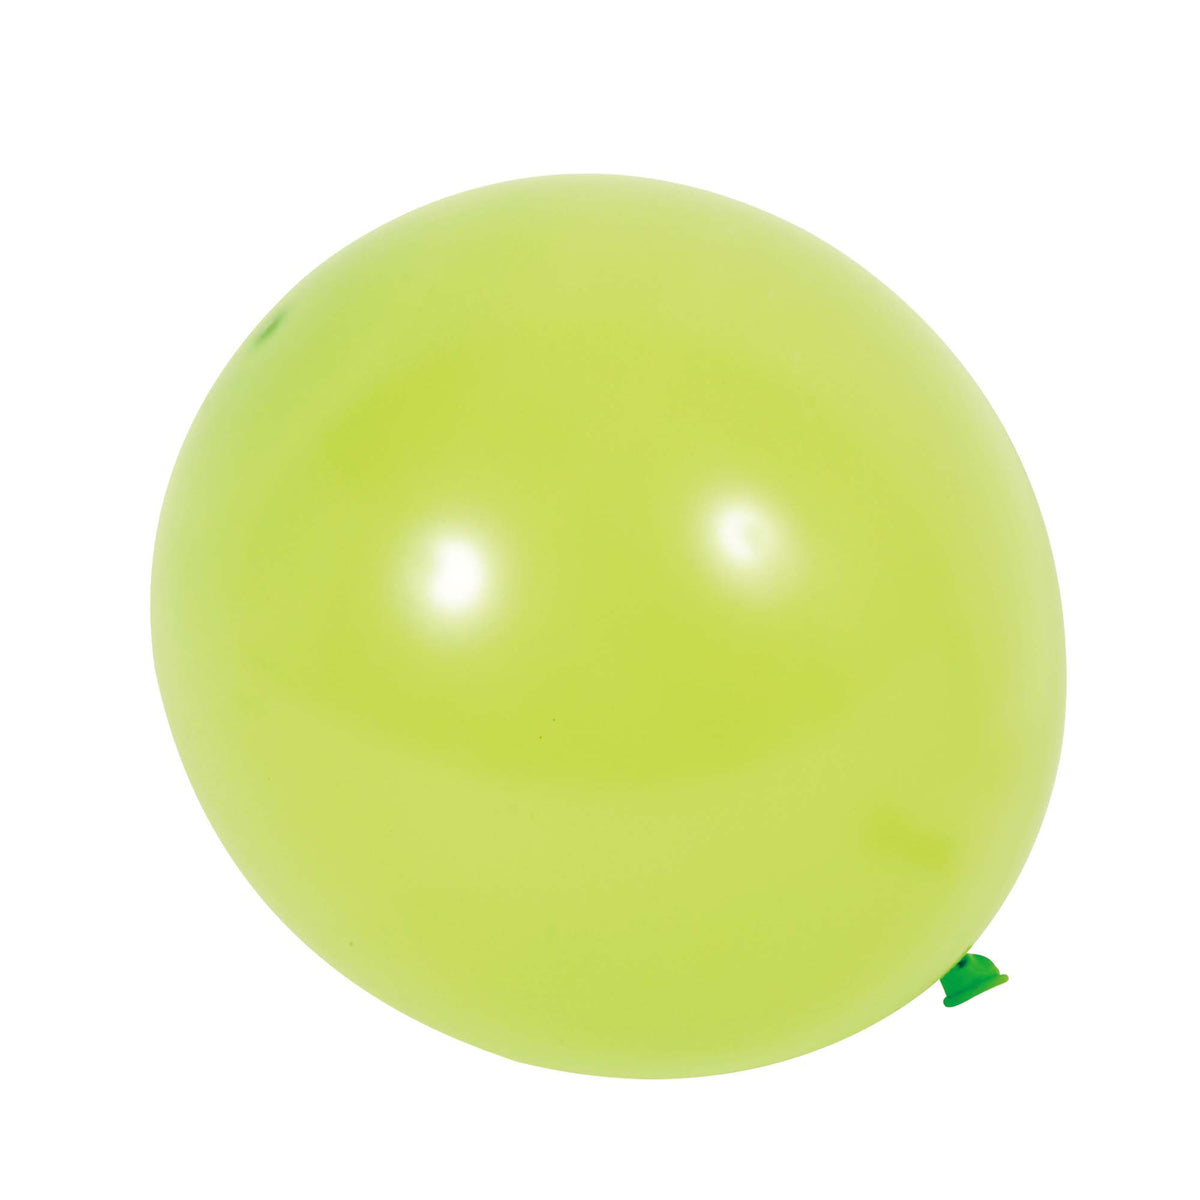 Wholesale Party Balloons - Decorations for Party and More